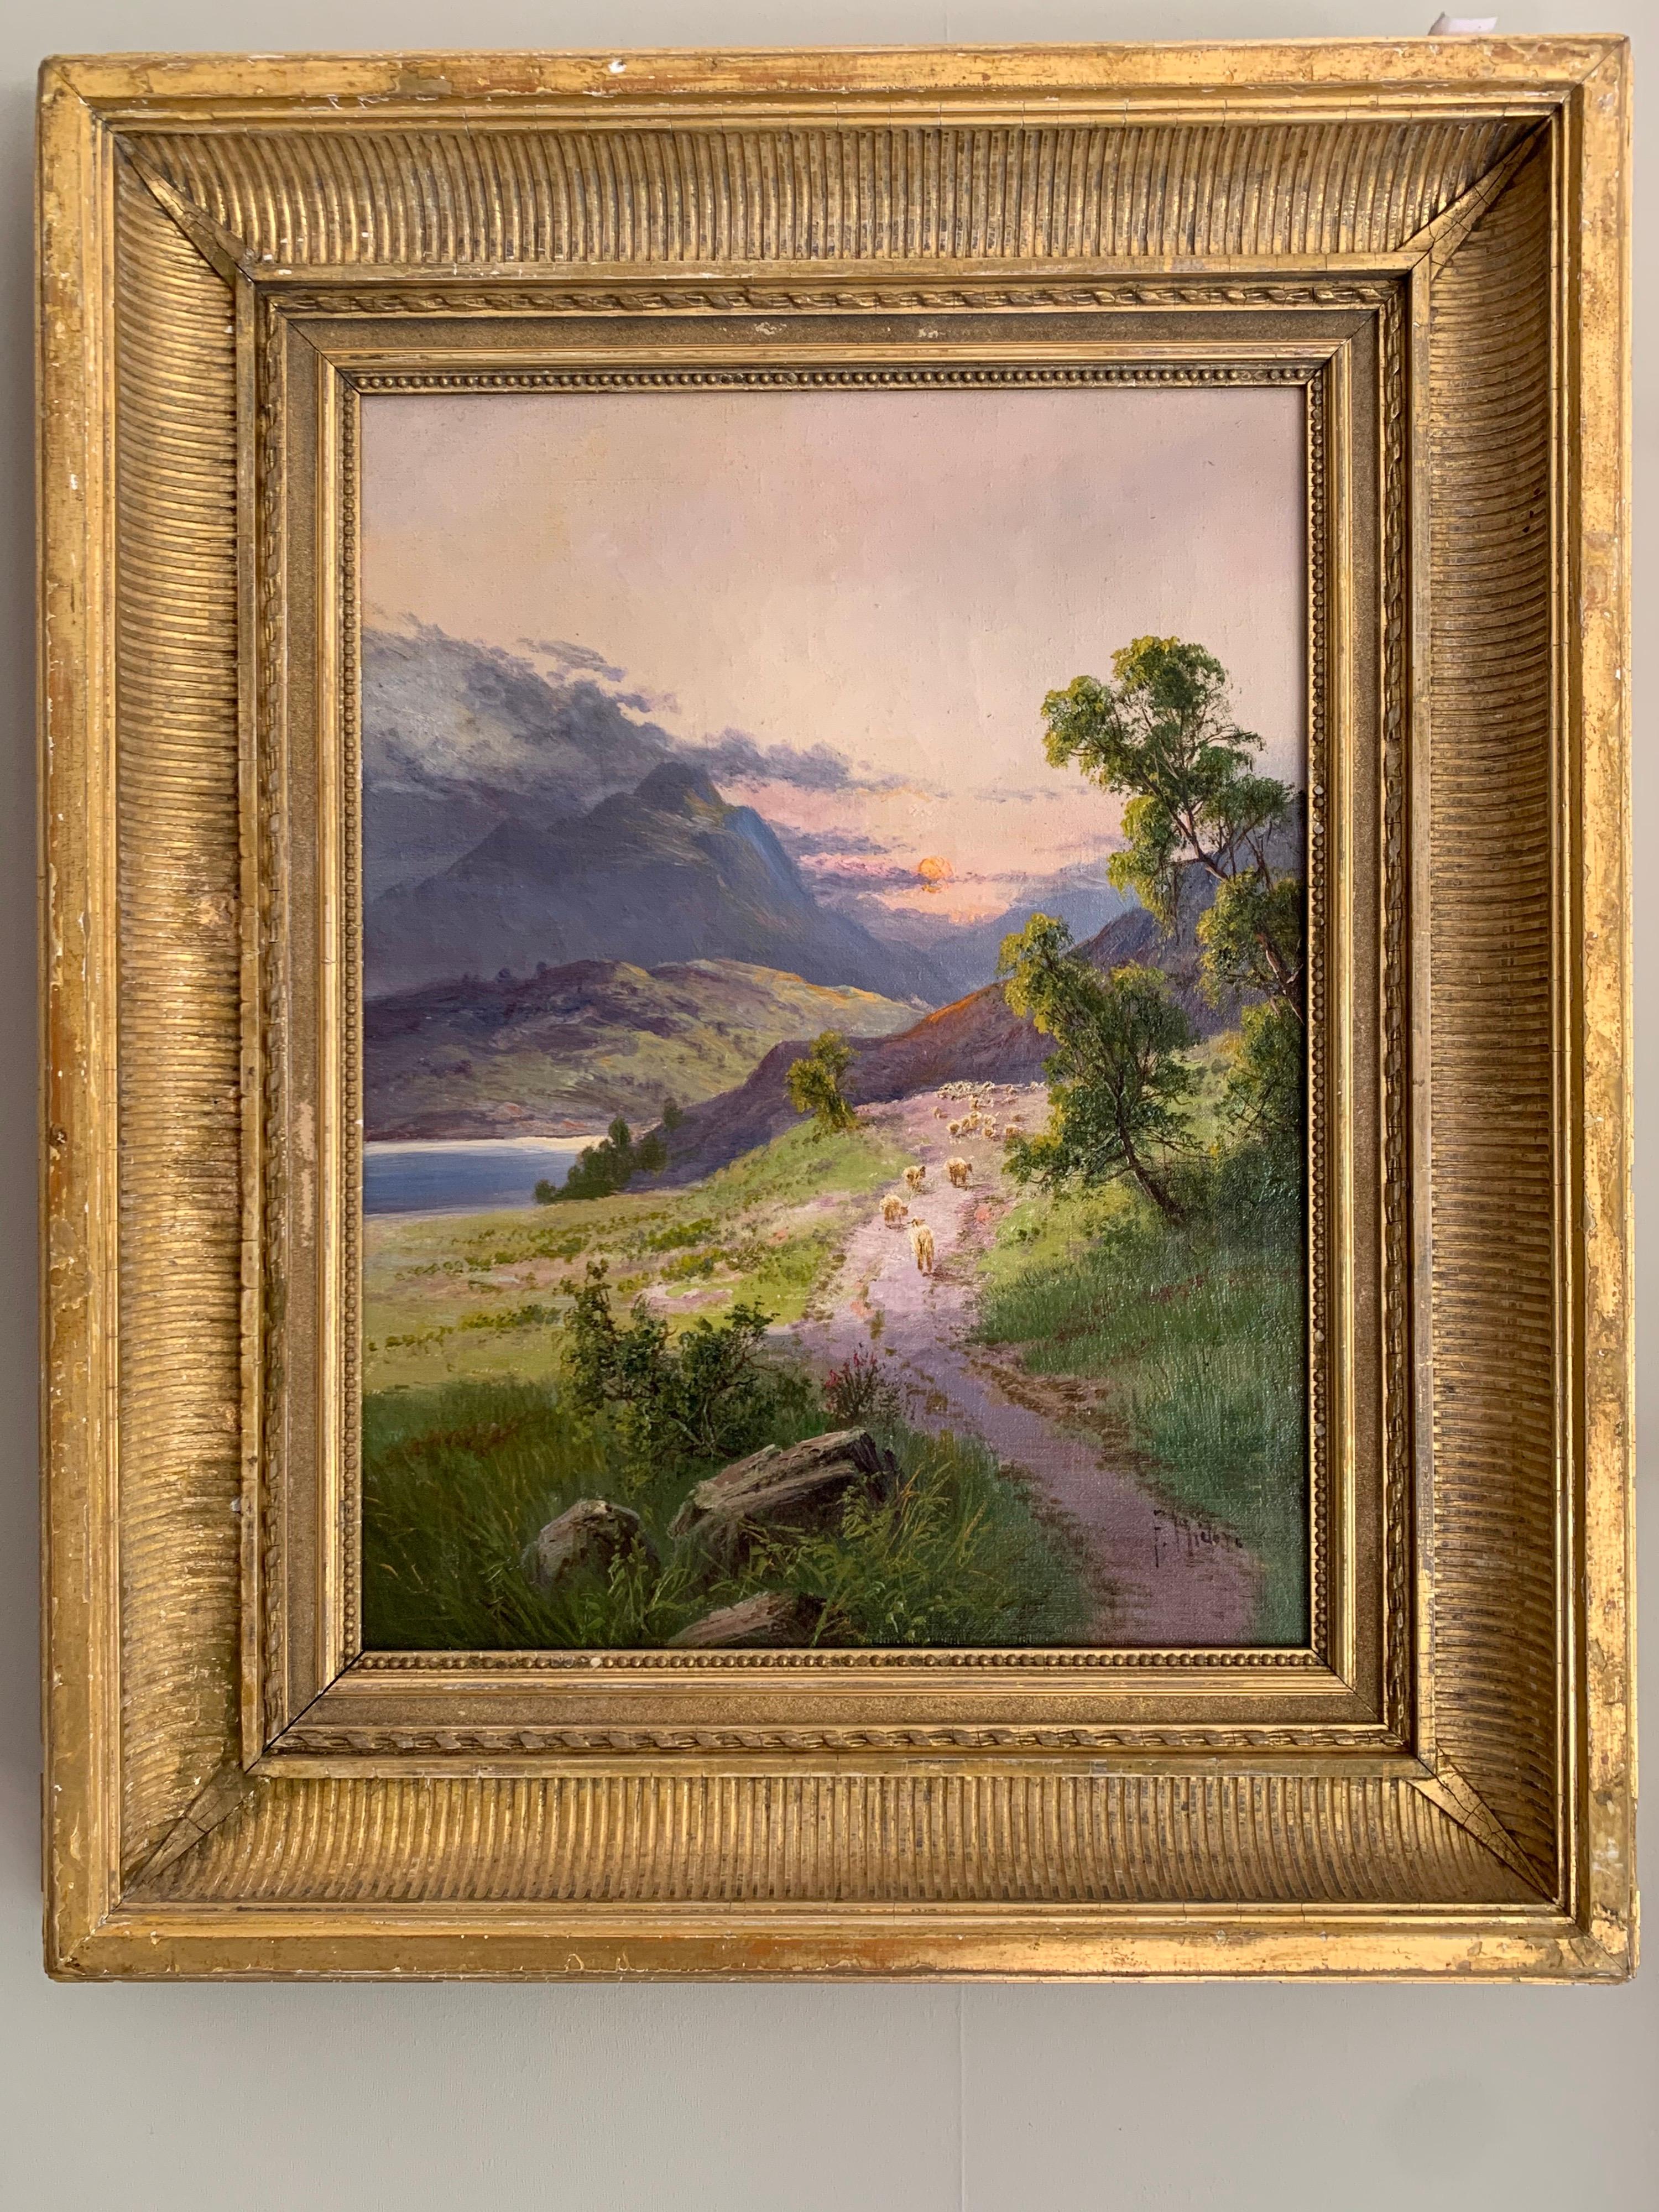 The Highland Path
by Frank Hider (British, 1861-1933)
signed oil painting on canvas, framed
canvas 18 x 14 inches
frame: 22 x 18 inches

provenance: private collection, England

Charming antique oil painting by the well listed and very popular